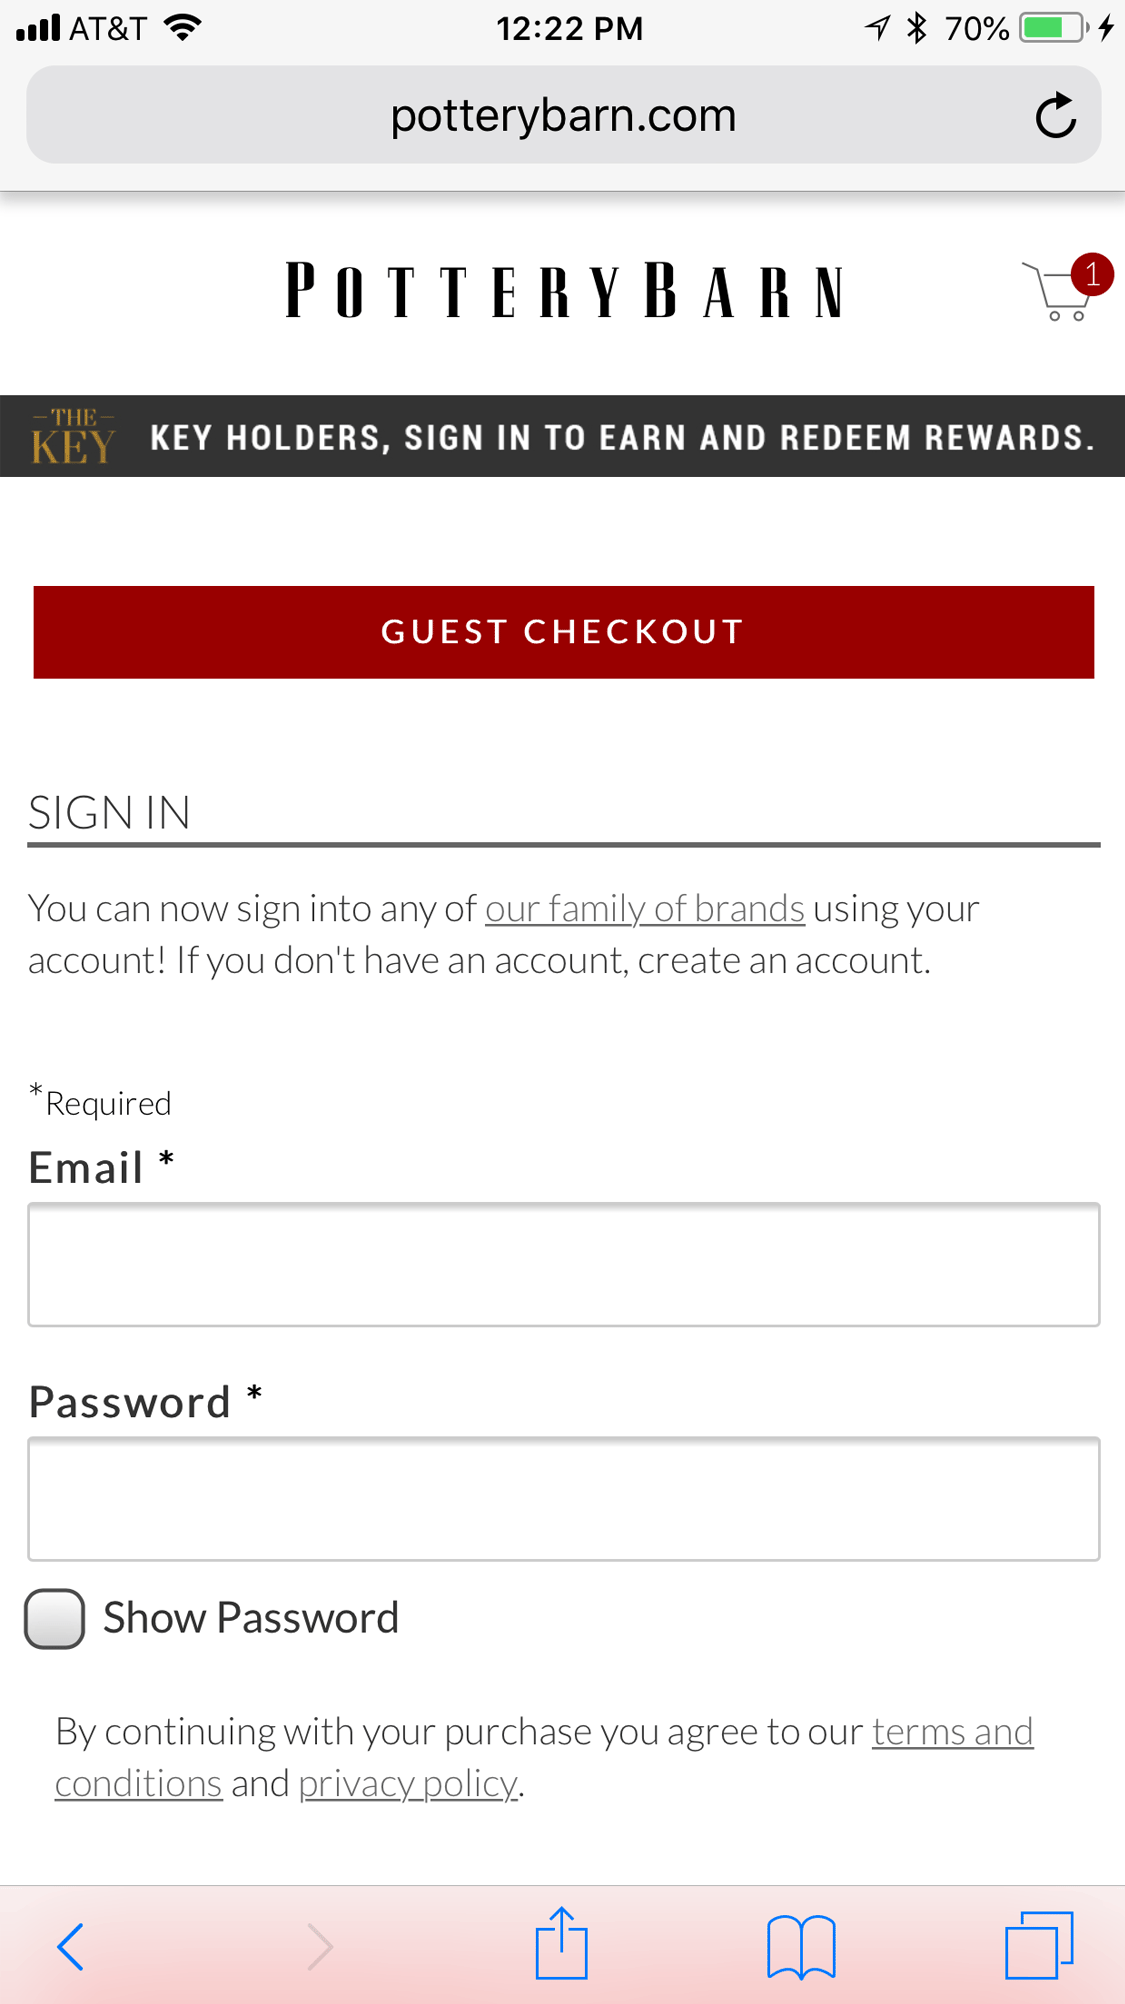 Pottery Barn makes it easy to checkout as a guest